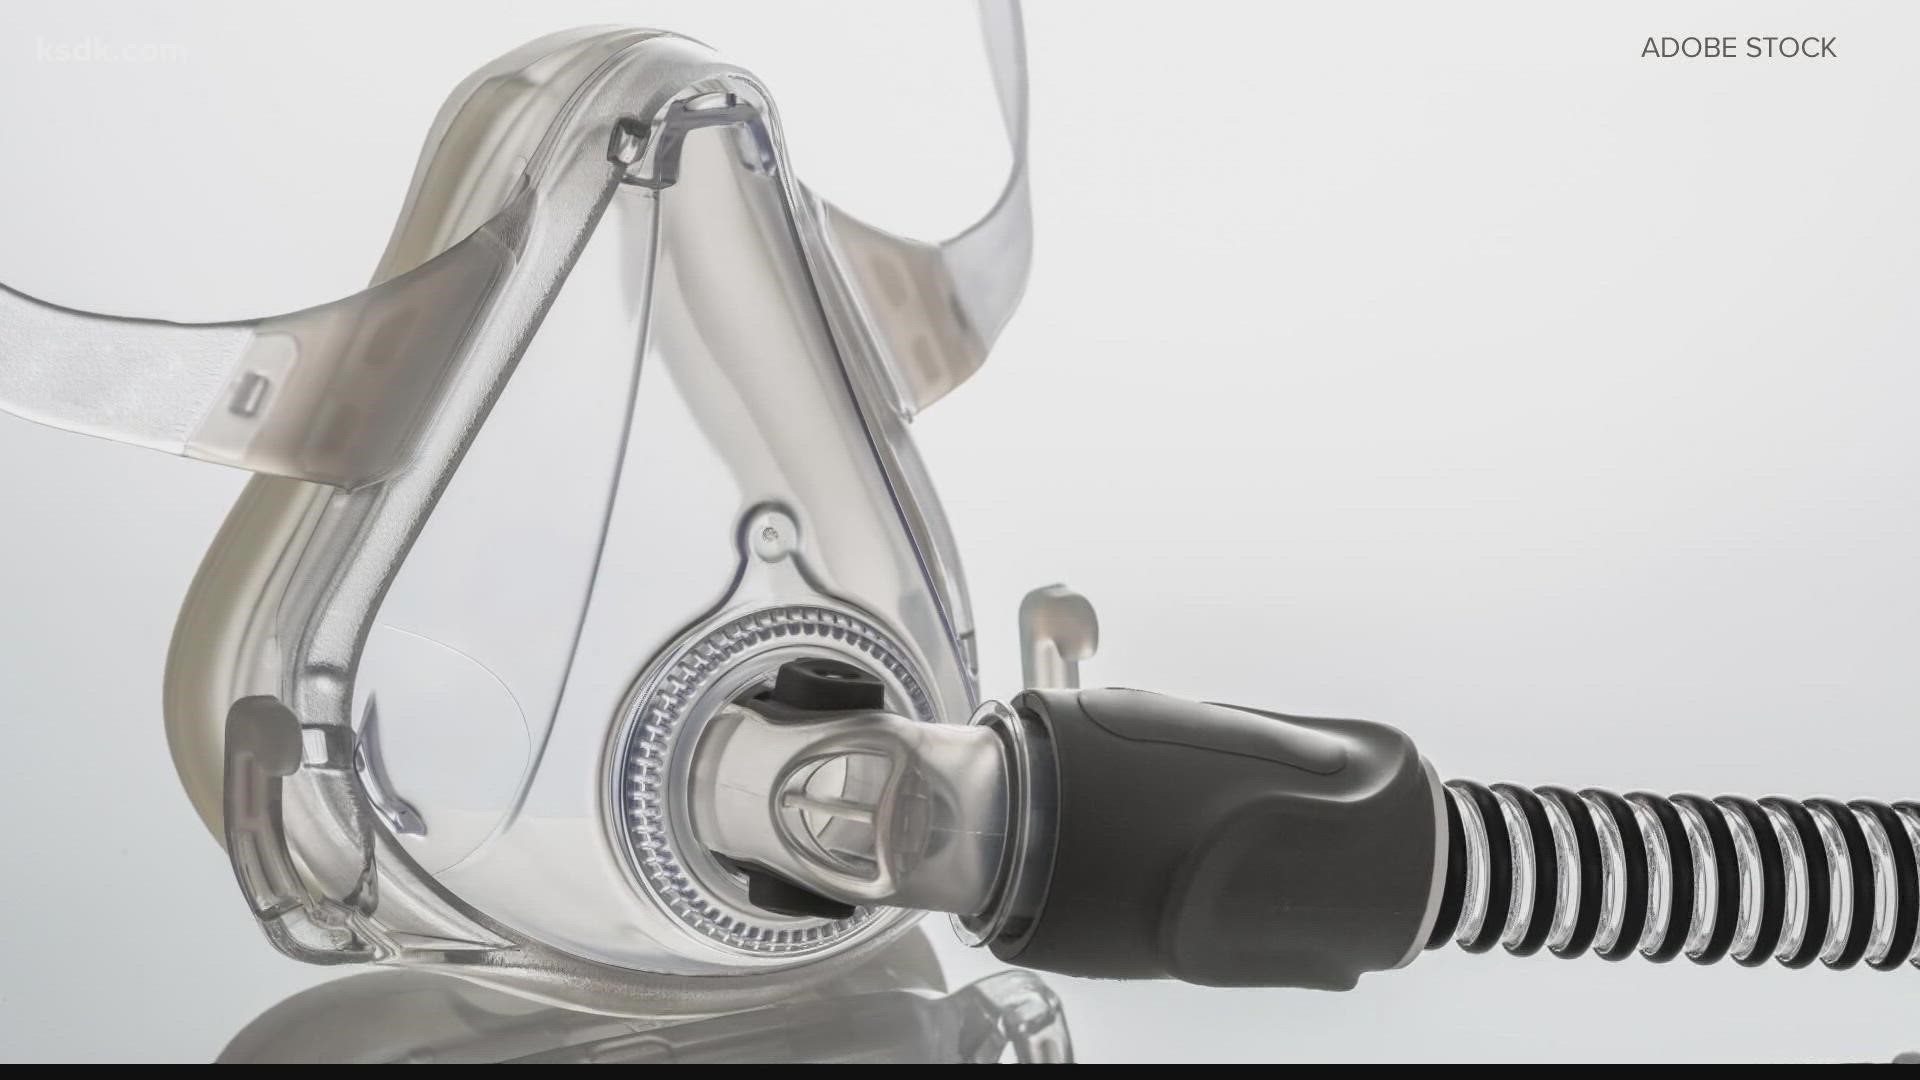 Mailings and ads with specific guidance for CPAP users are confusing, patients say. Scammers may already be taking advantage.